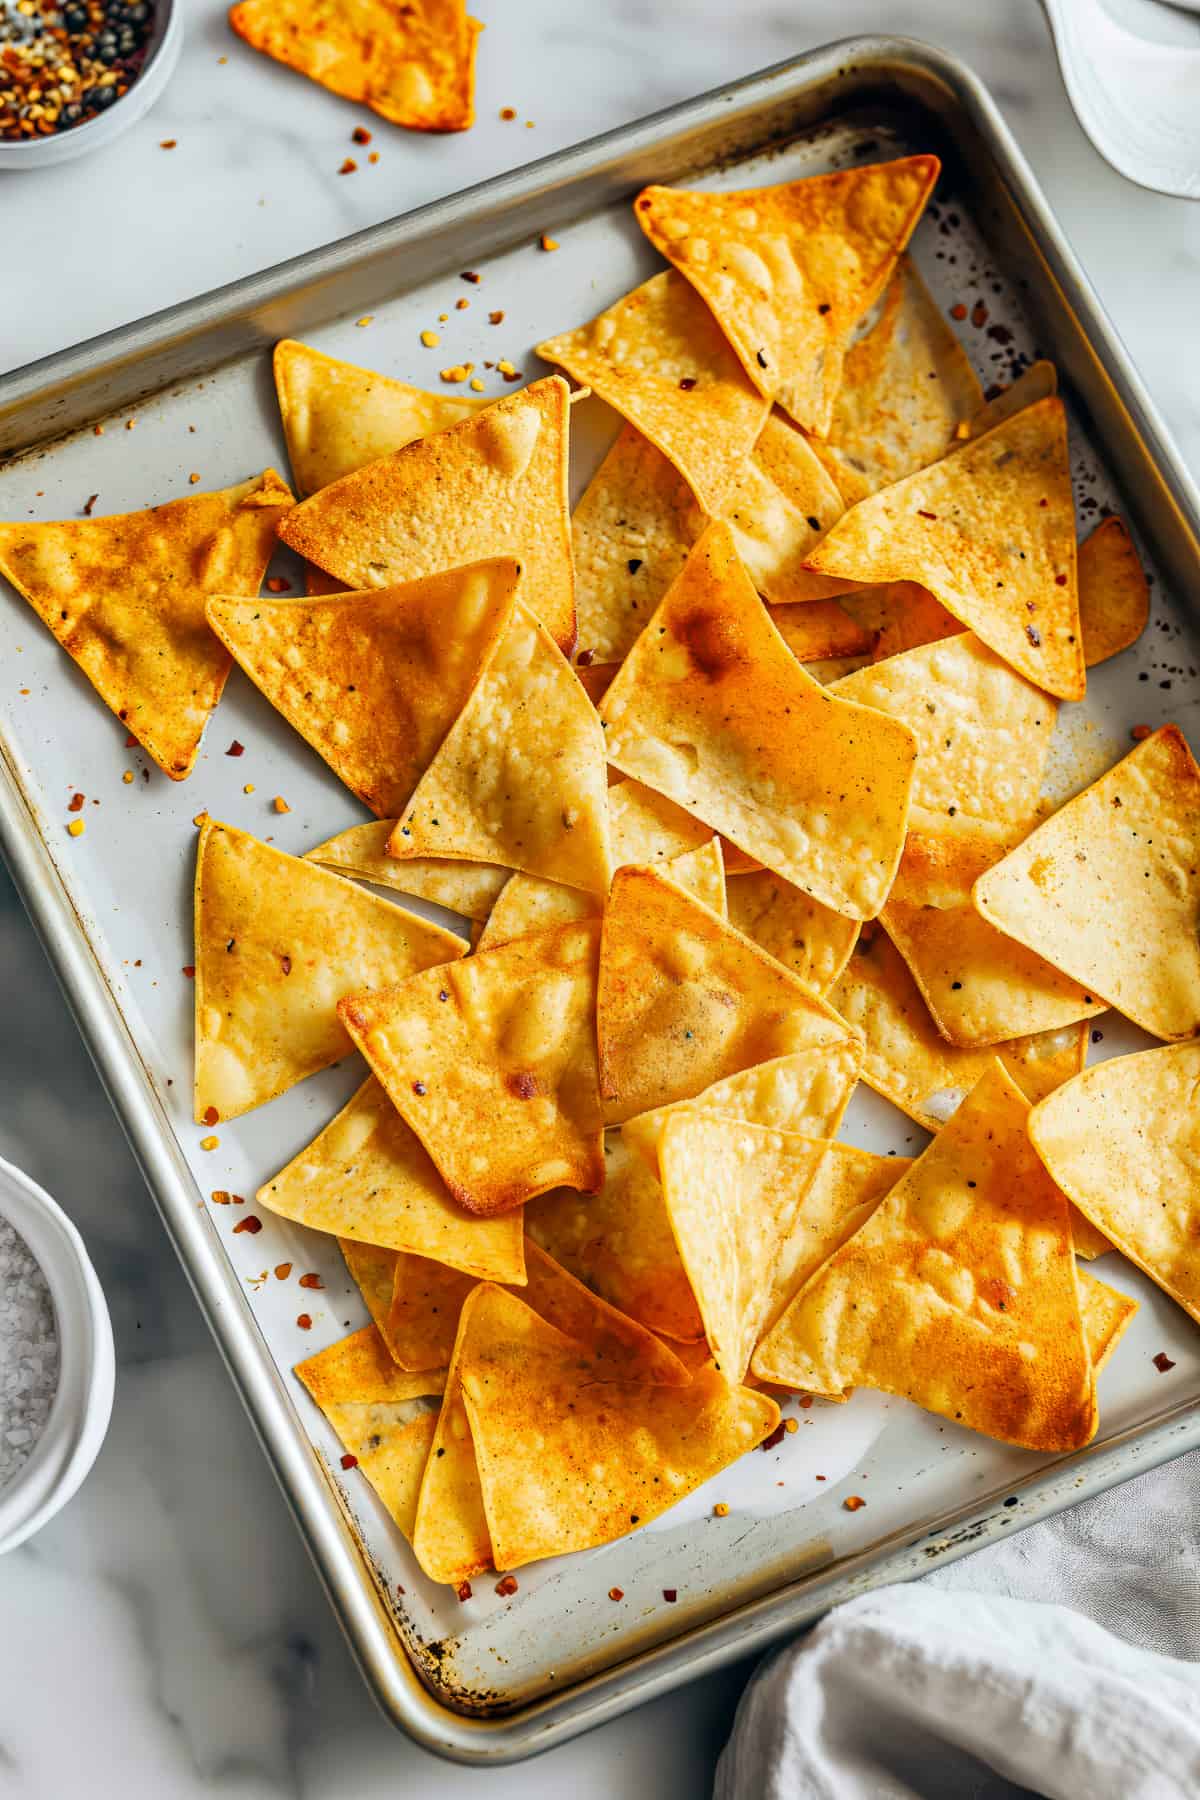 Homemade Tortilla Chips Recipe - Gimme Some Oven